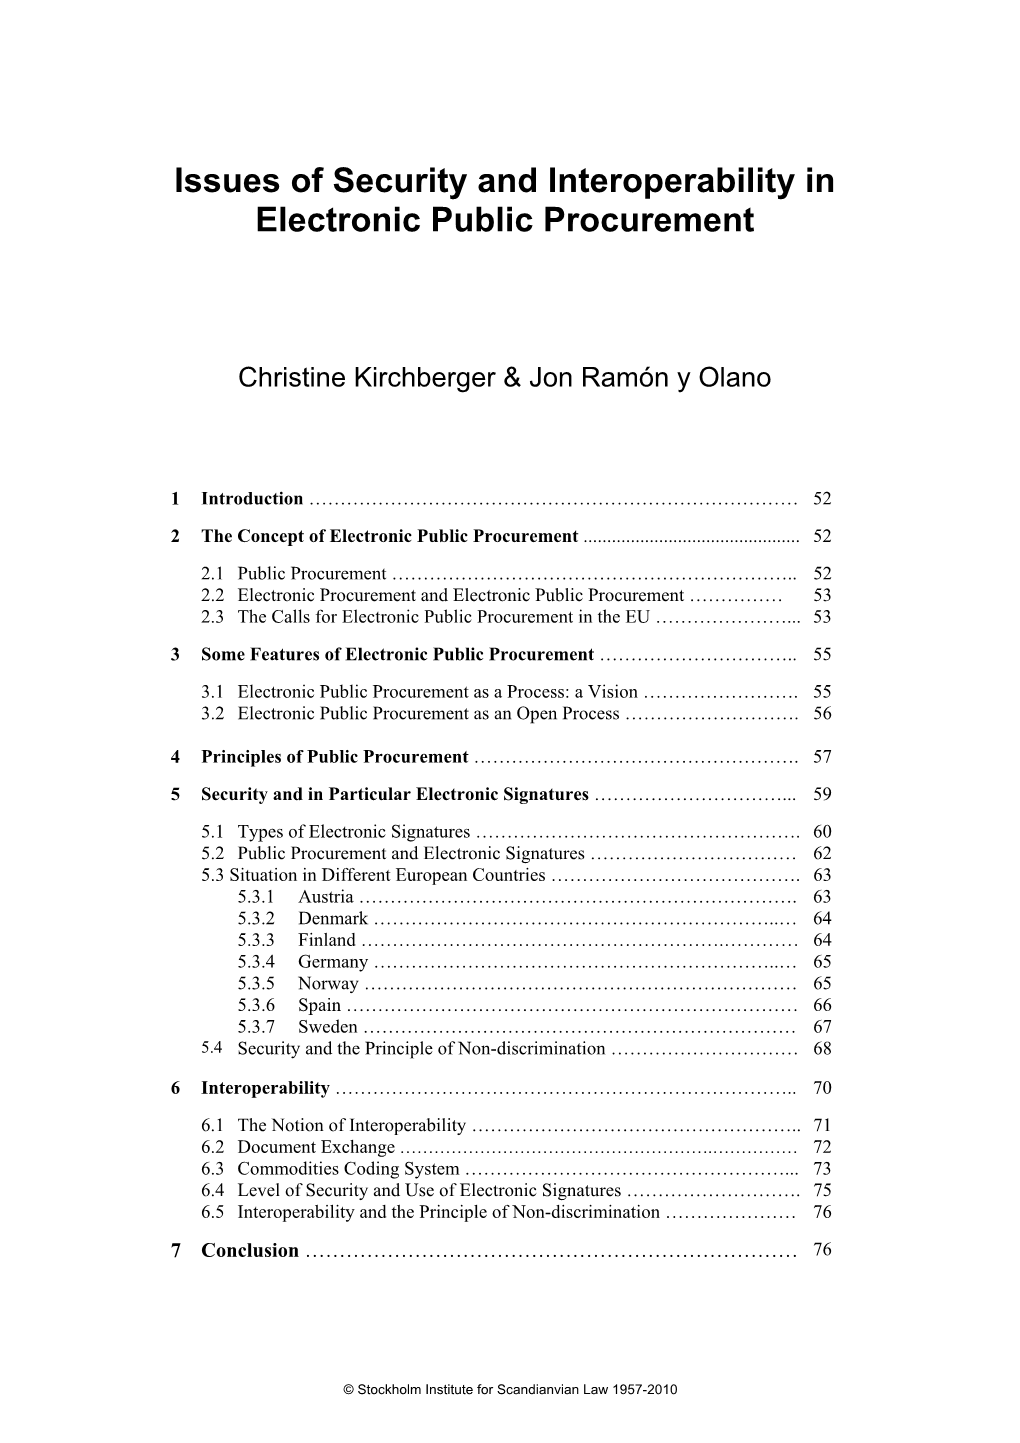 Issues of Security and Interoperability in Electronic Public Procurement